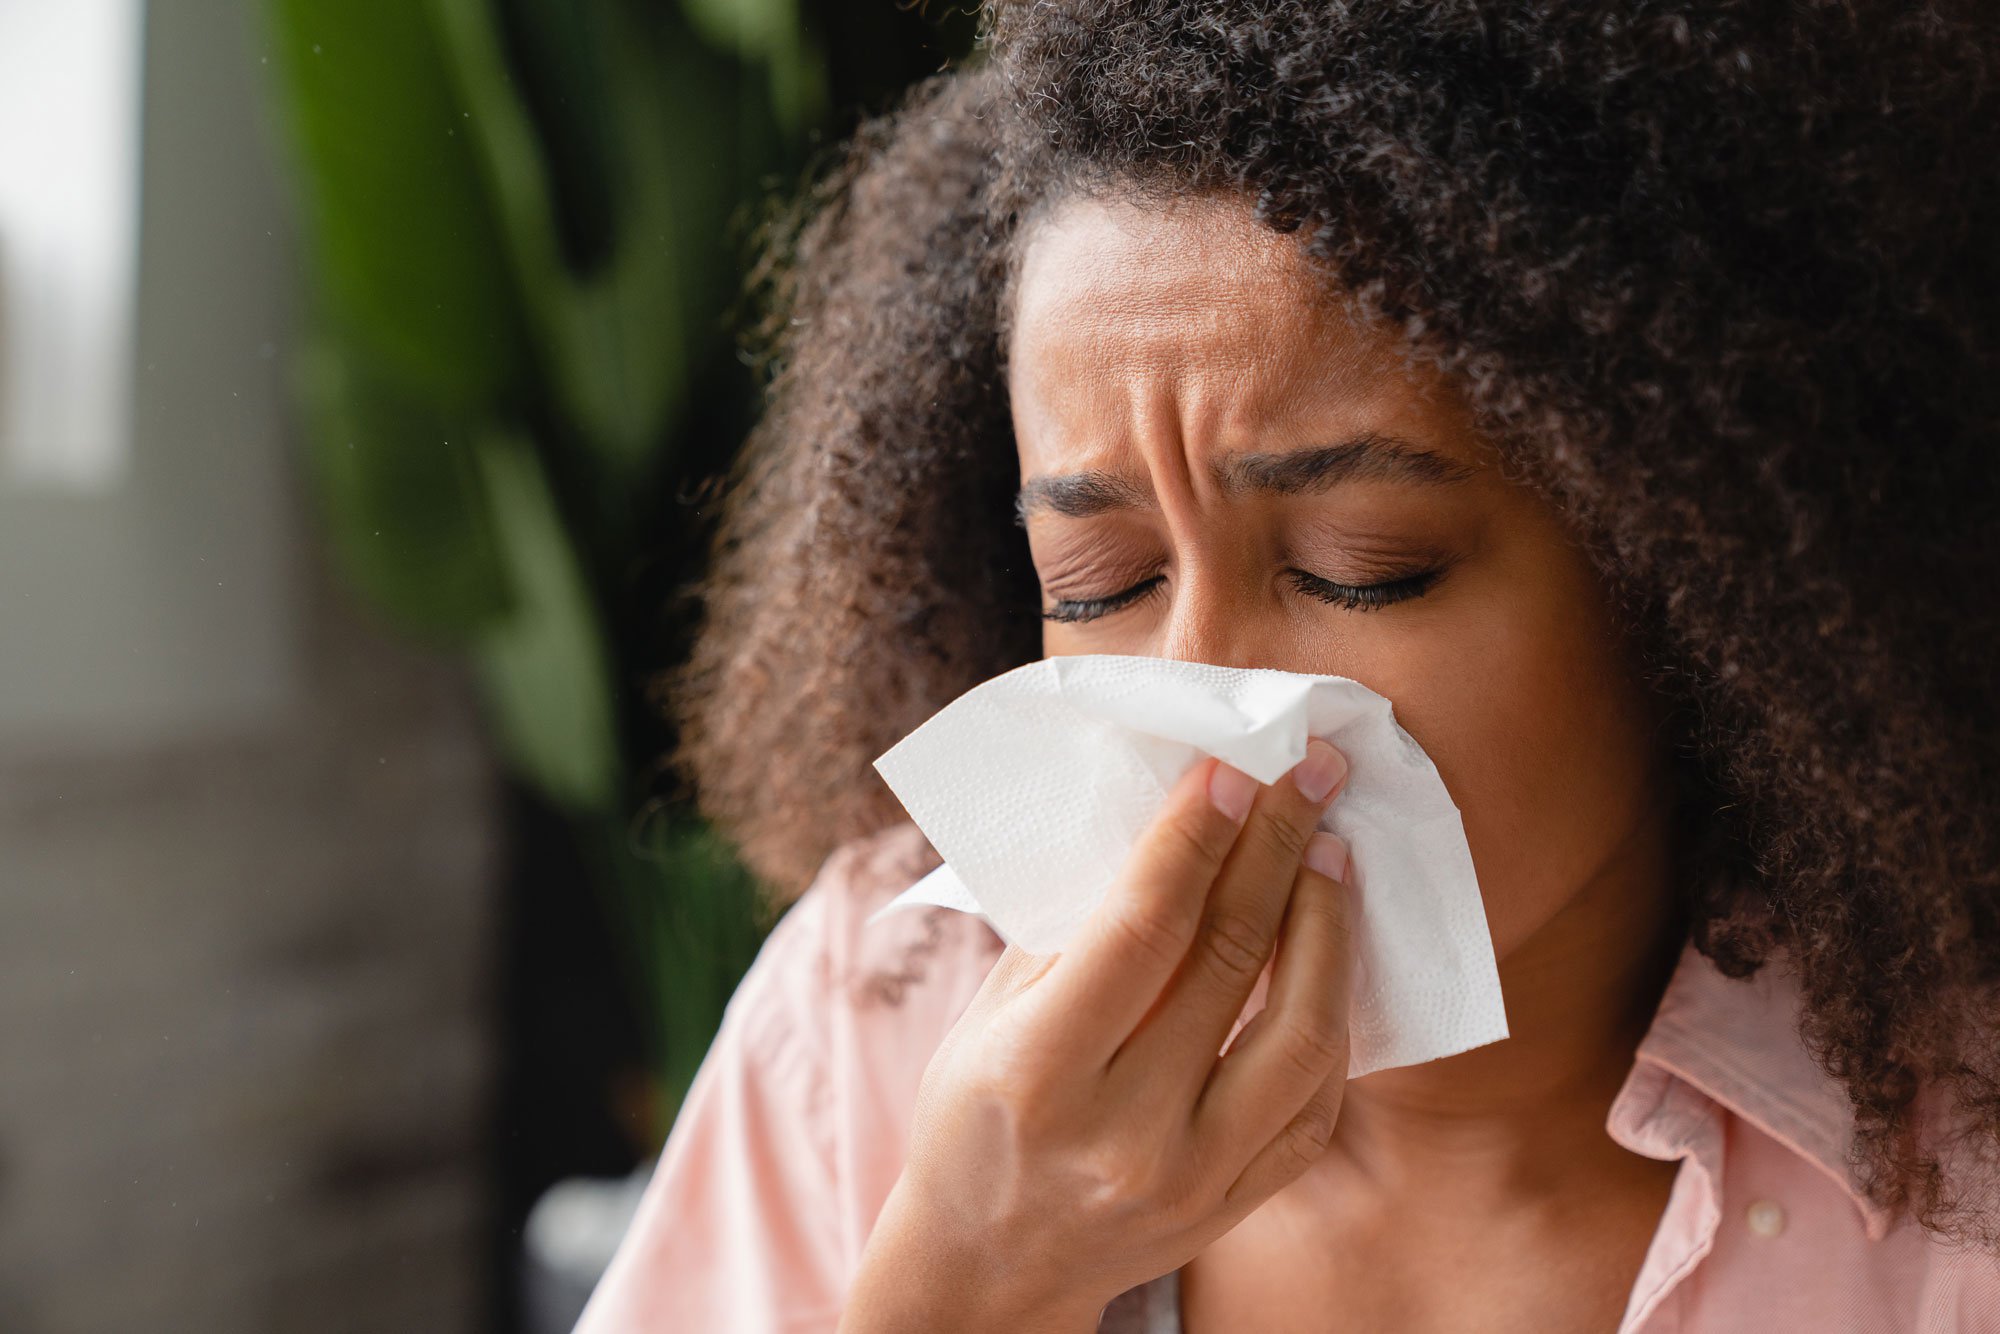 Woman blowing her nose into tissue